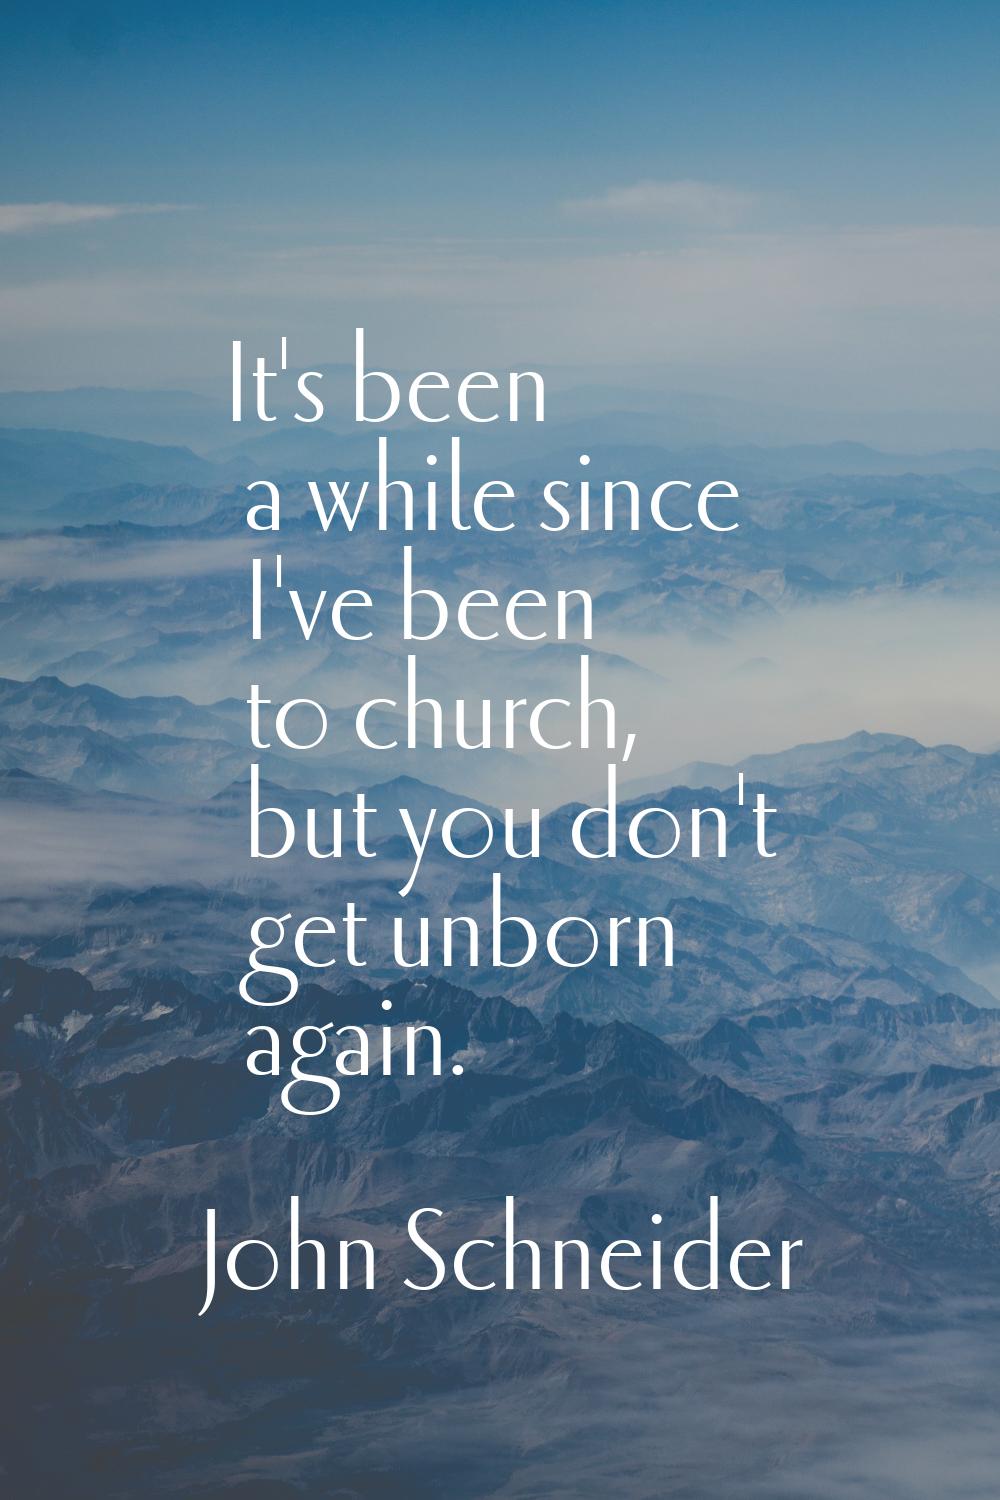 It's been a while since I've been to church, but you don't get unborn again.